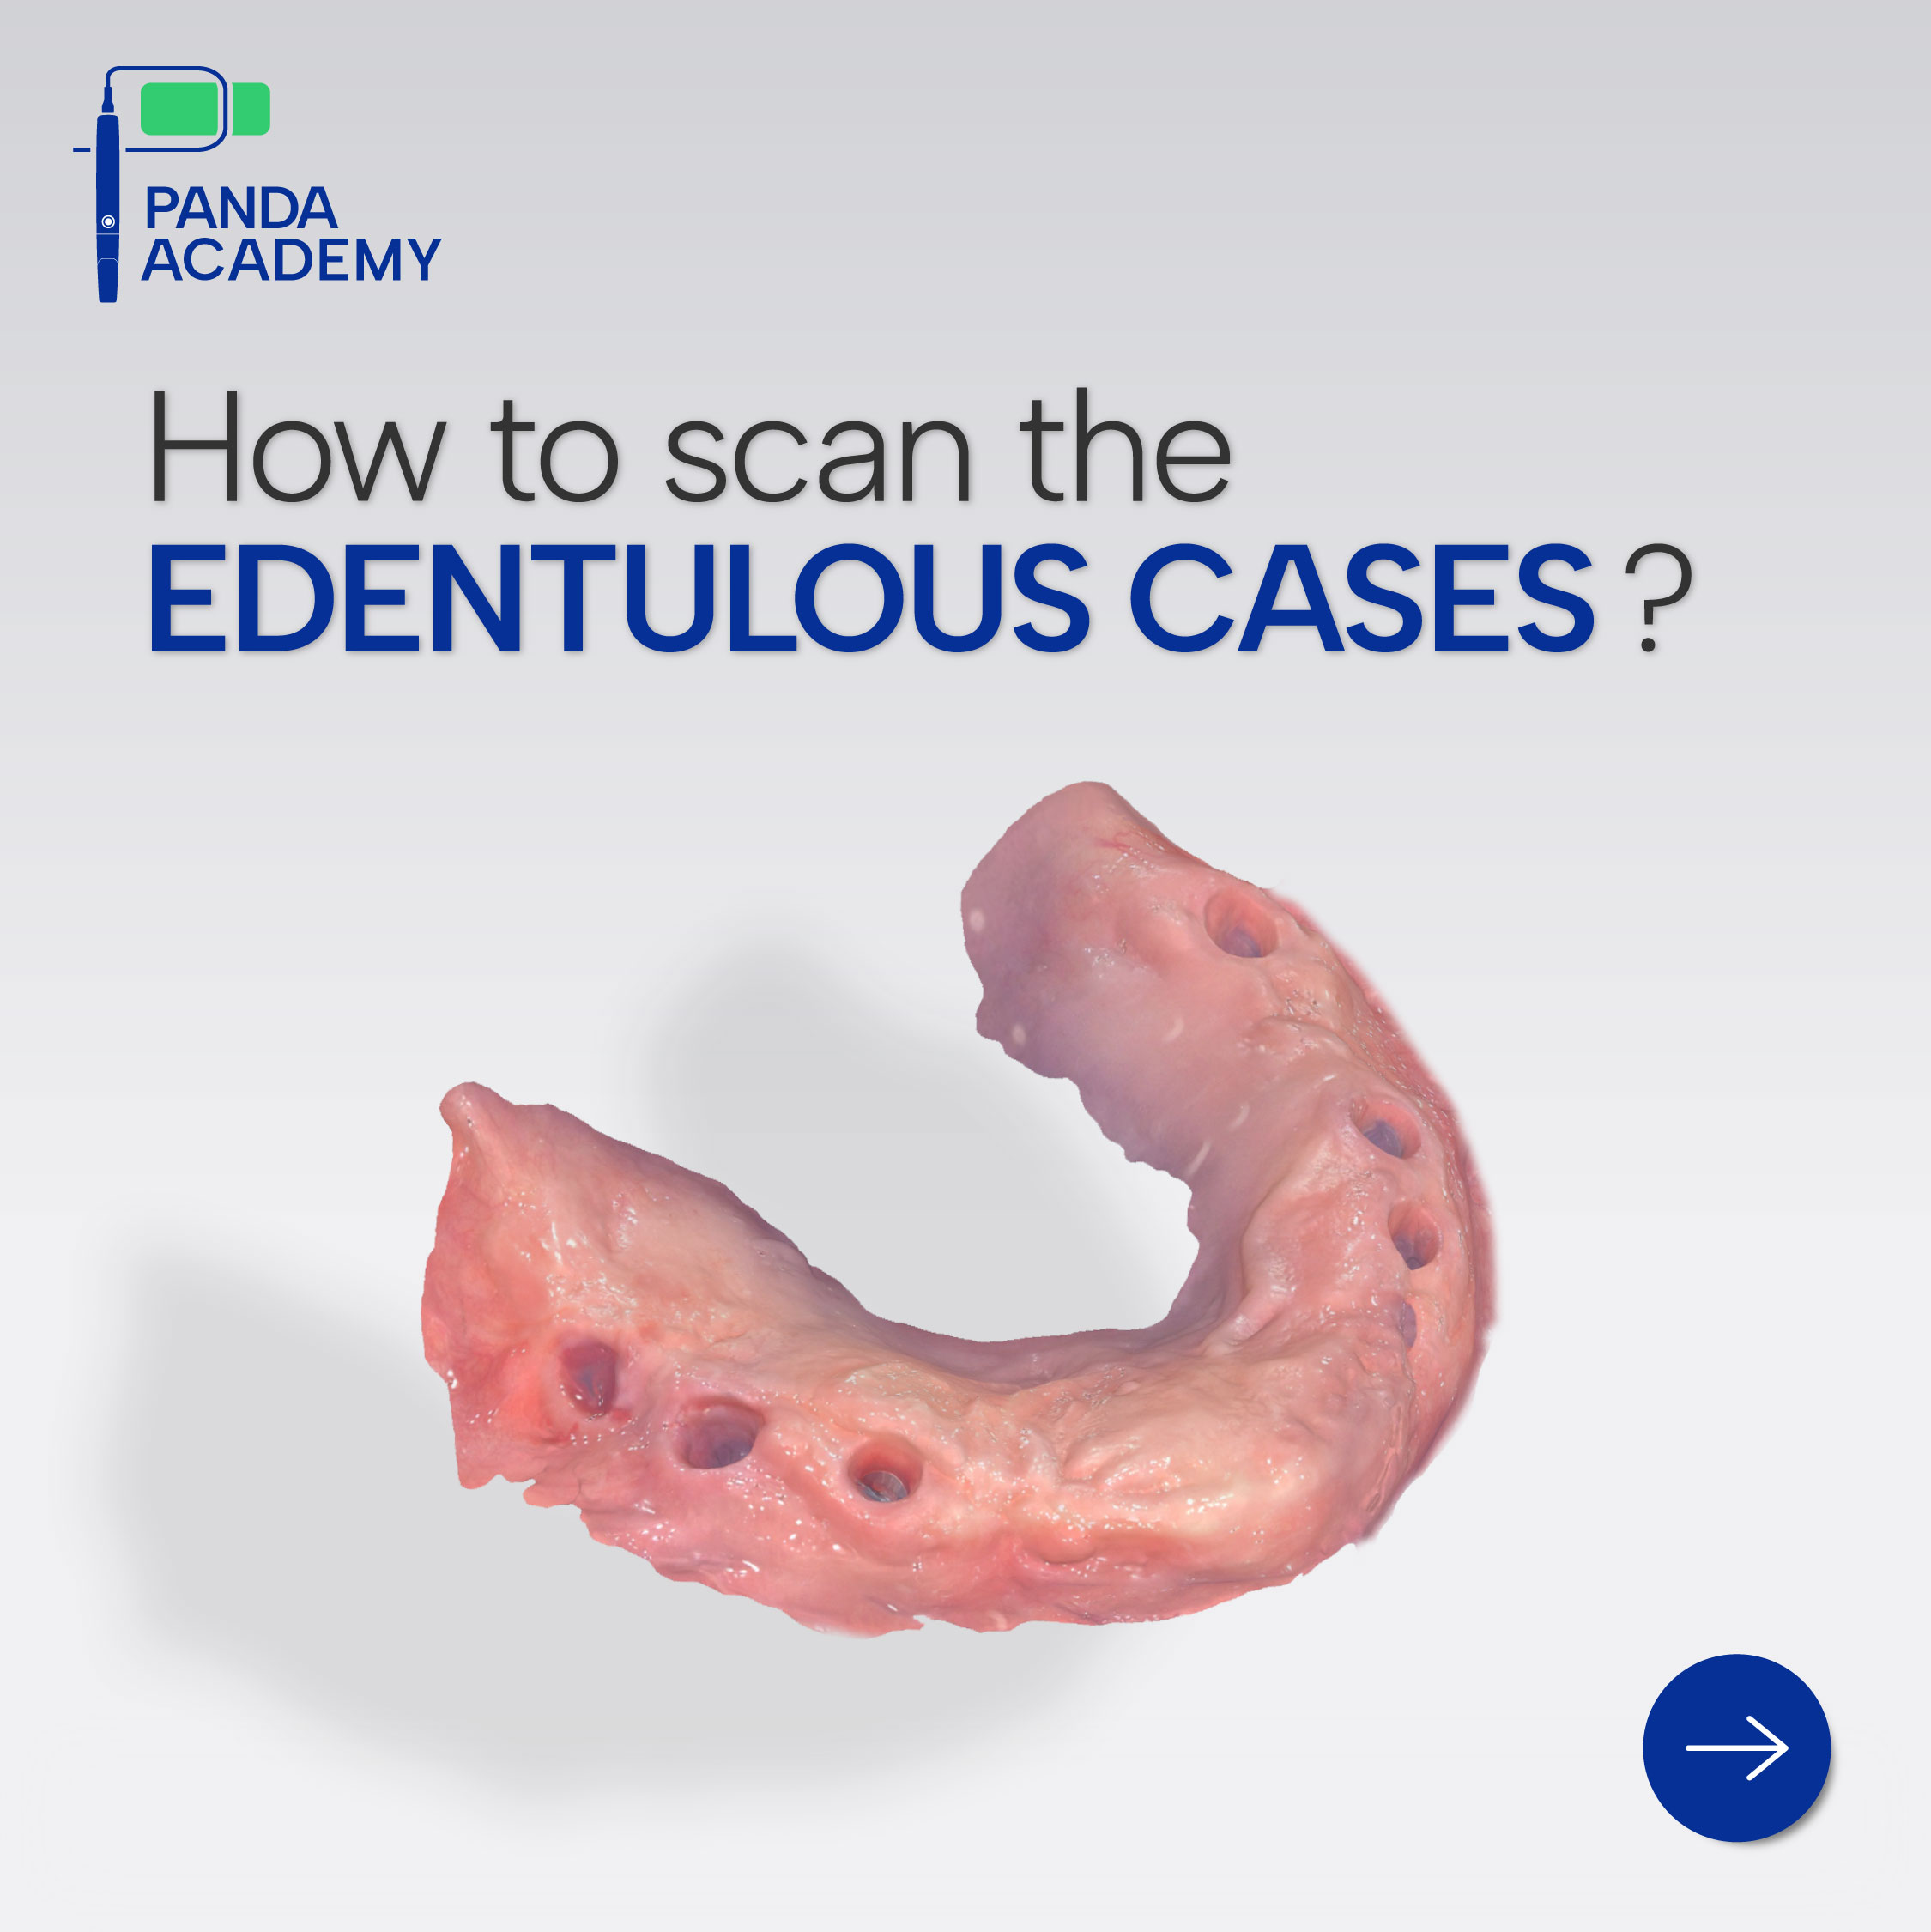 PANDA ACADEMY: How to scan edentulous cases?